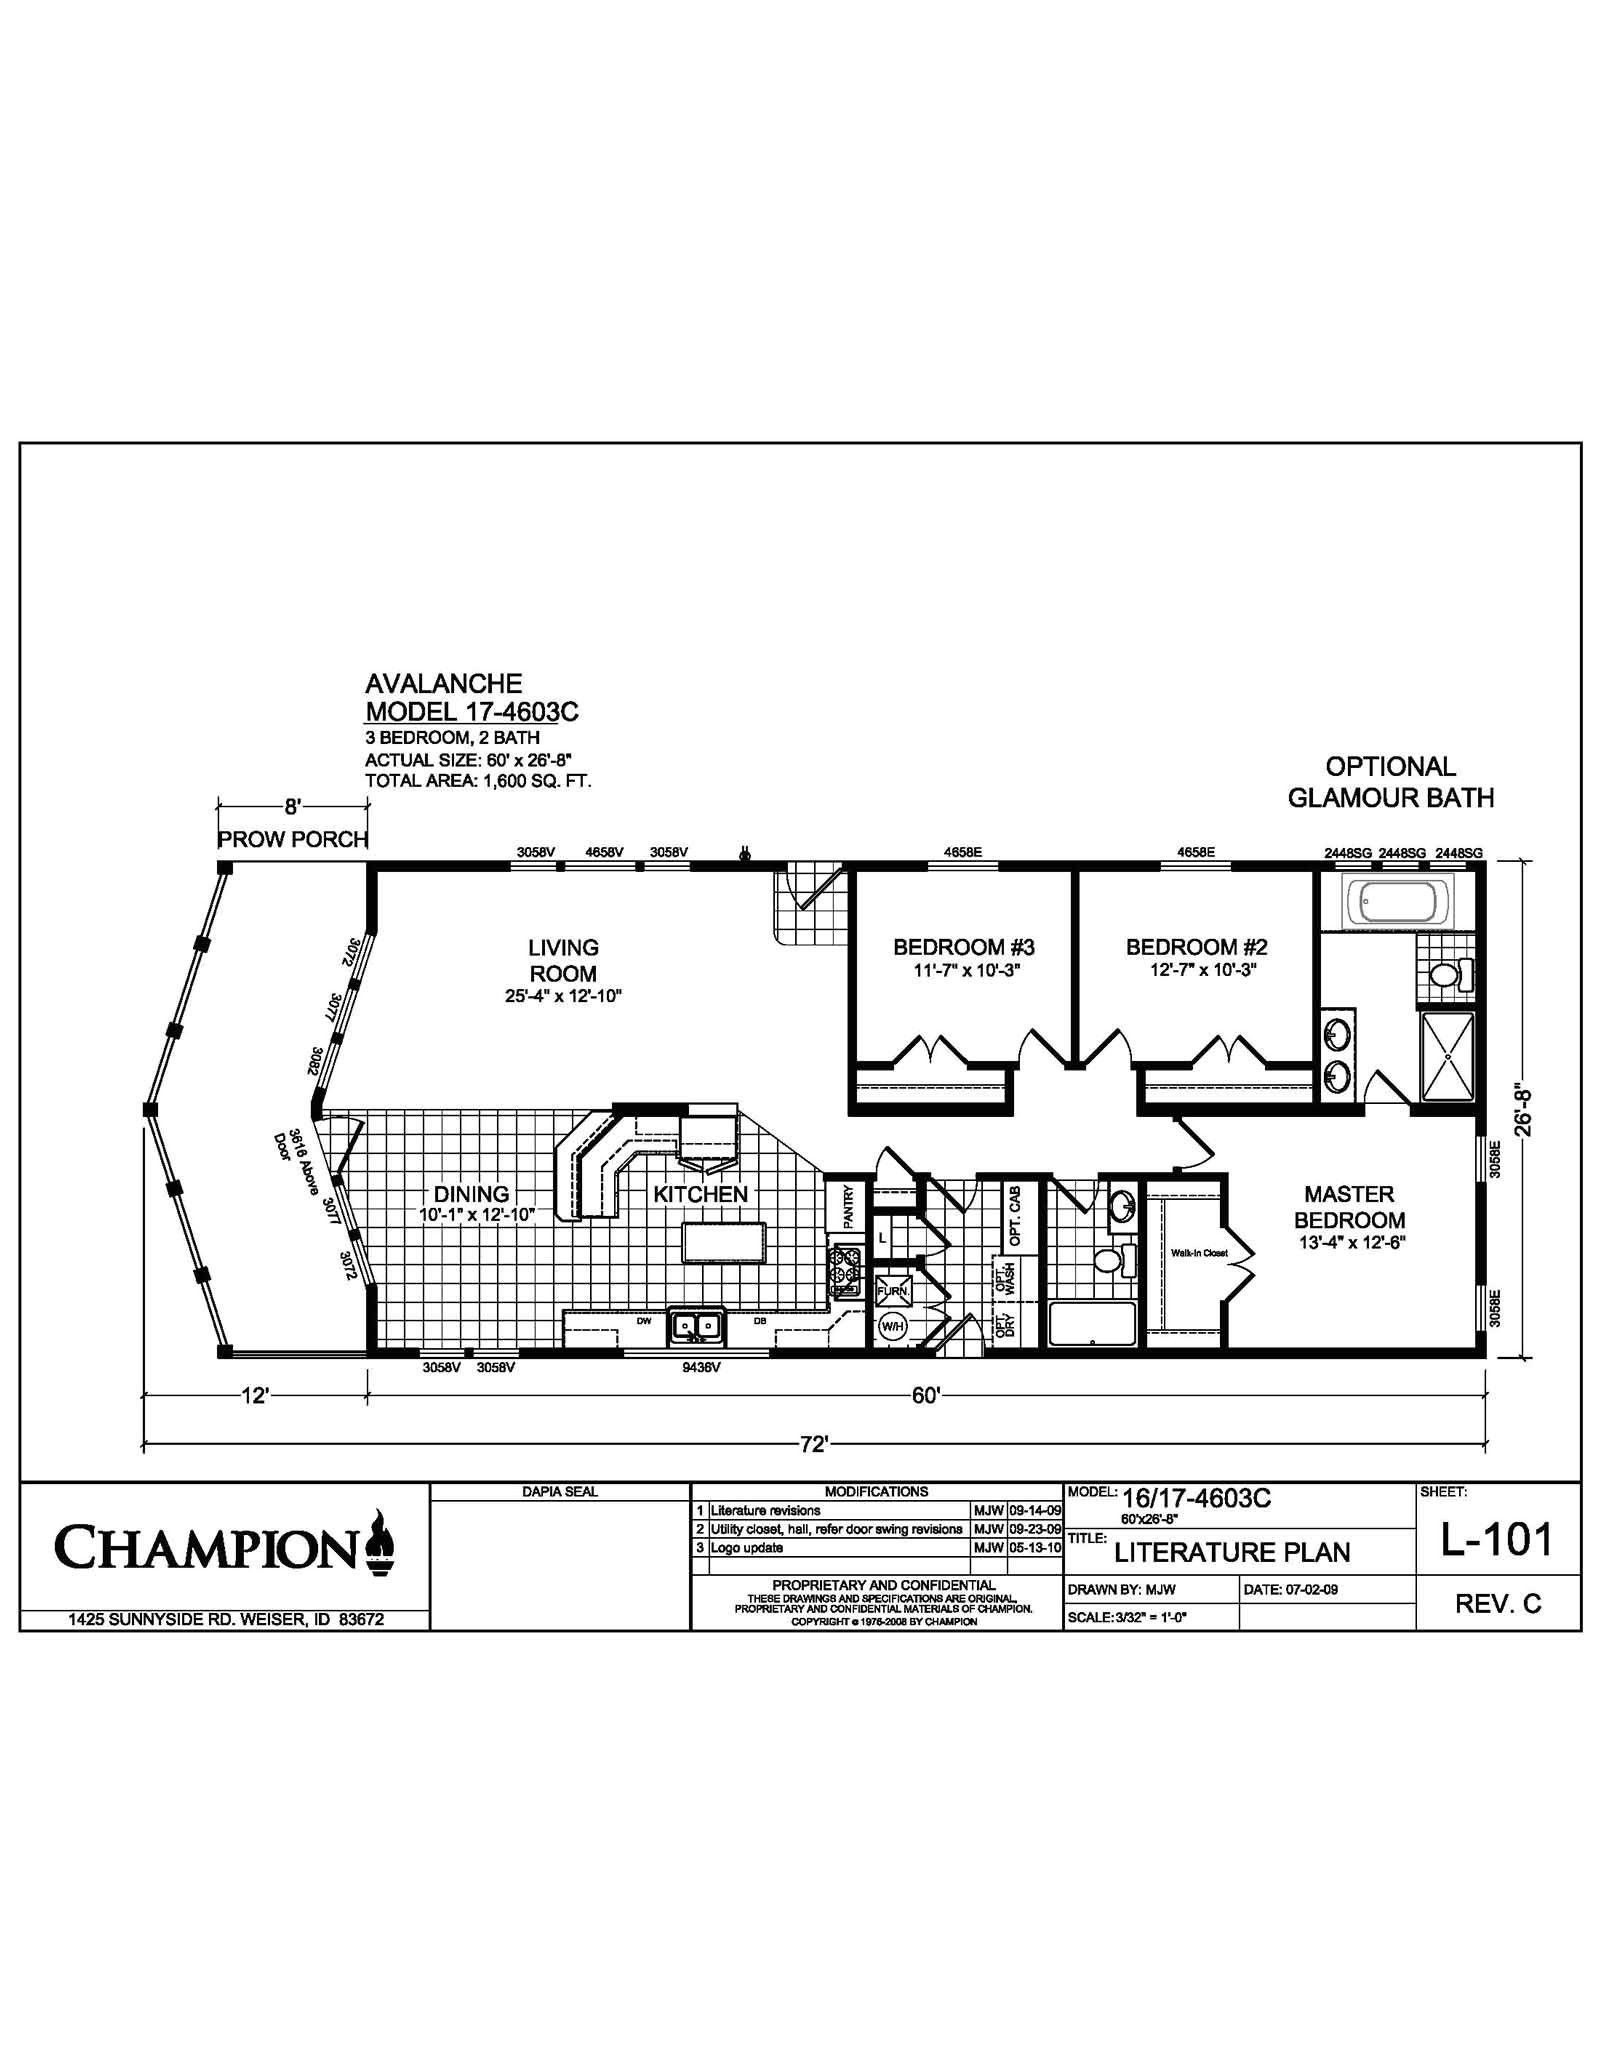 prow house plans